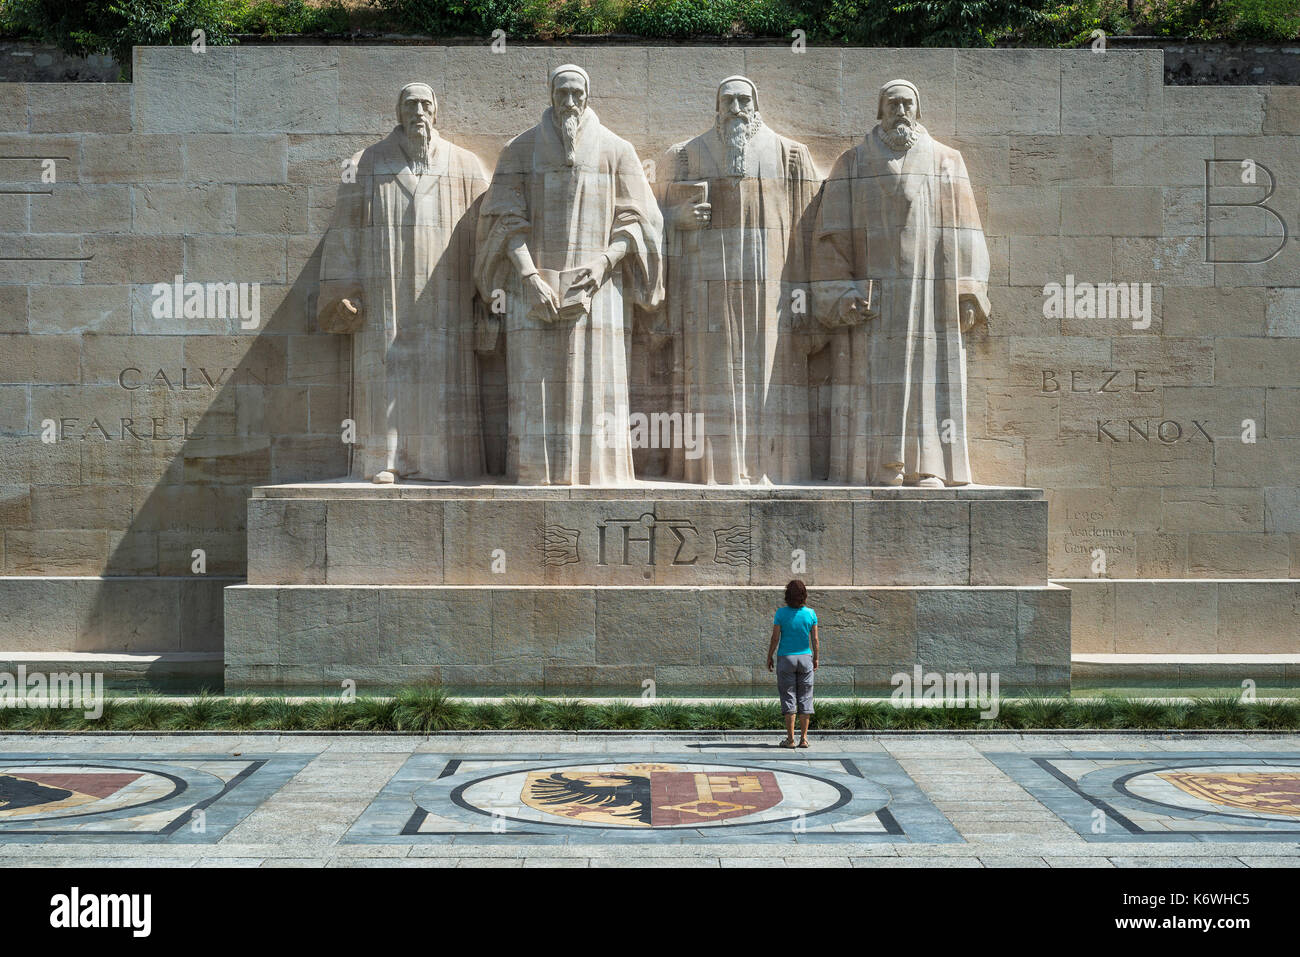 The reformers Farel, Calvin, Beza and Knox (from left to right), sculptures at the International Monument of the Reformation Stock Photo